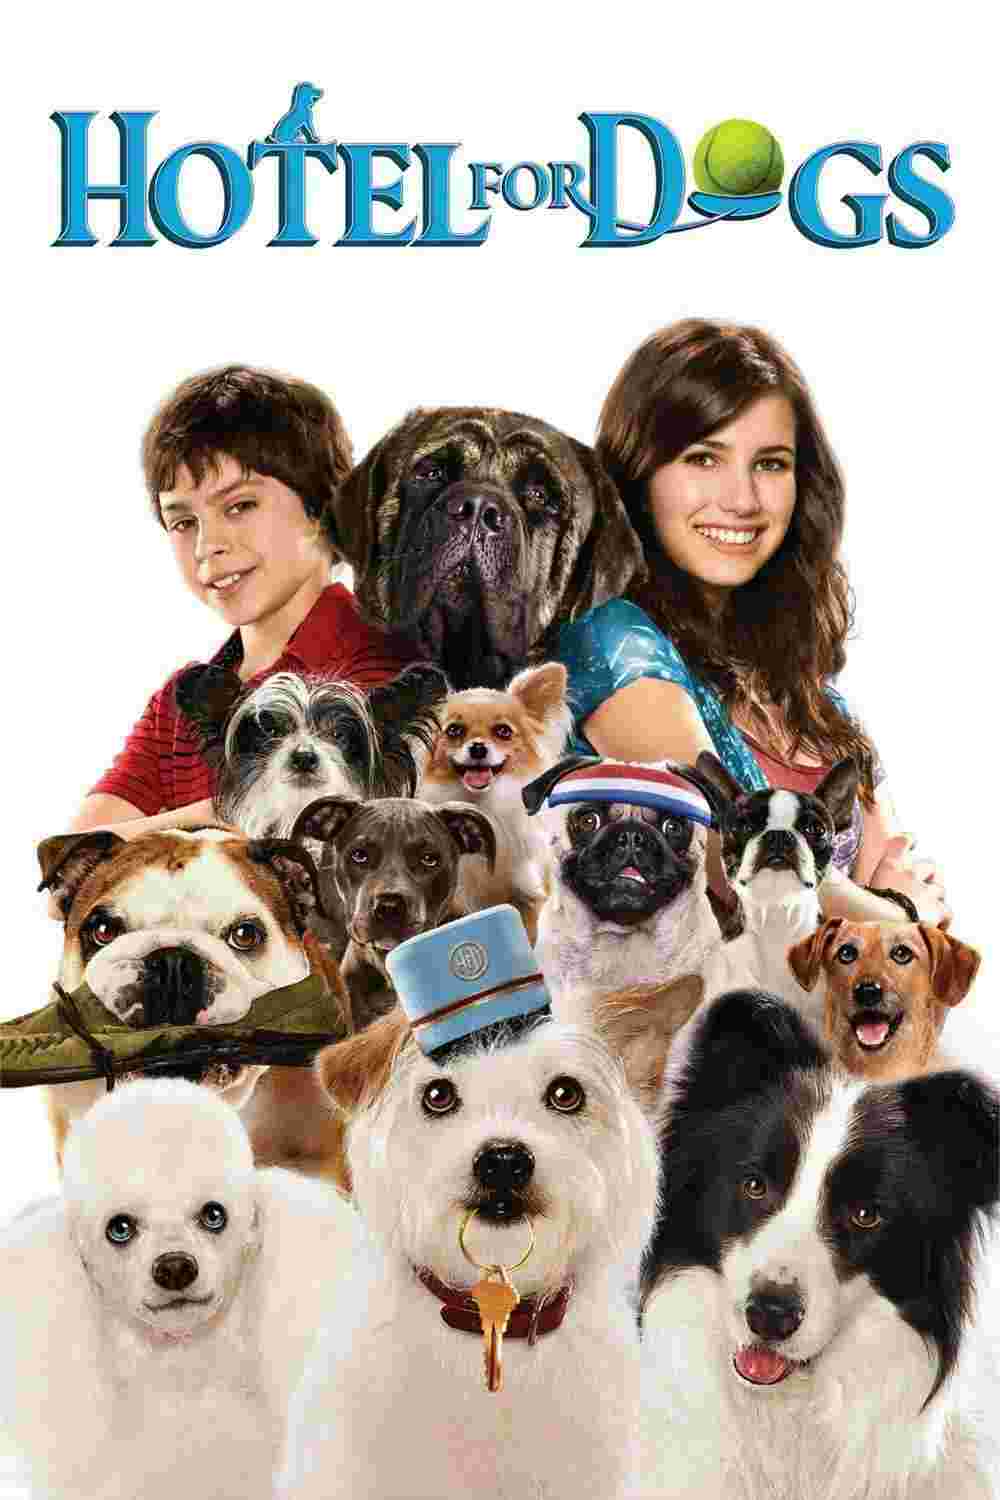 Hotel for Dogs (2009) Emma Roberts